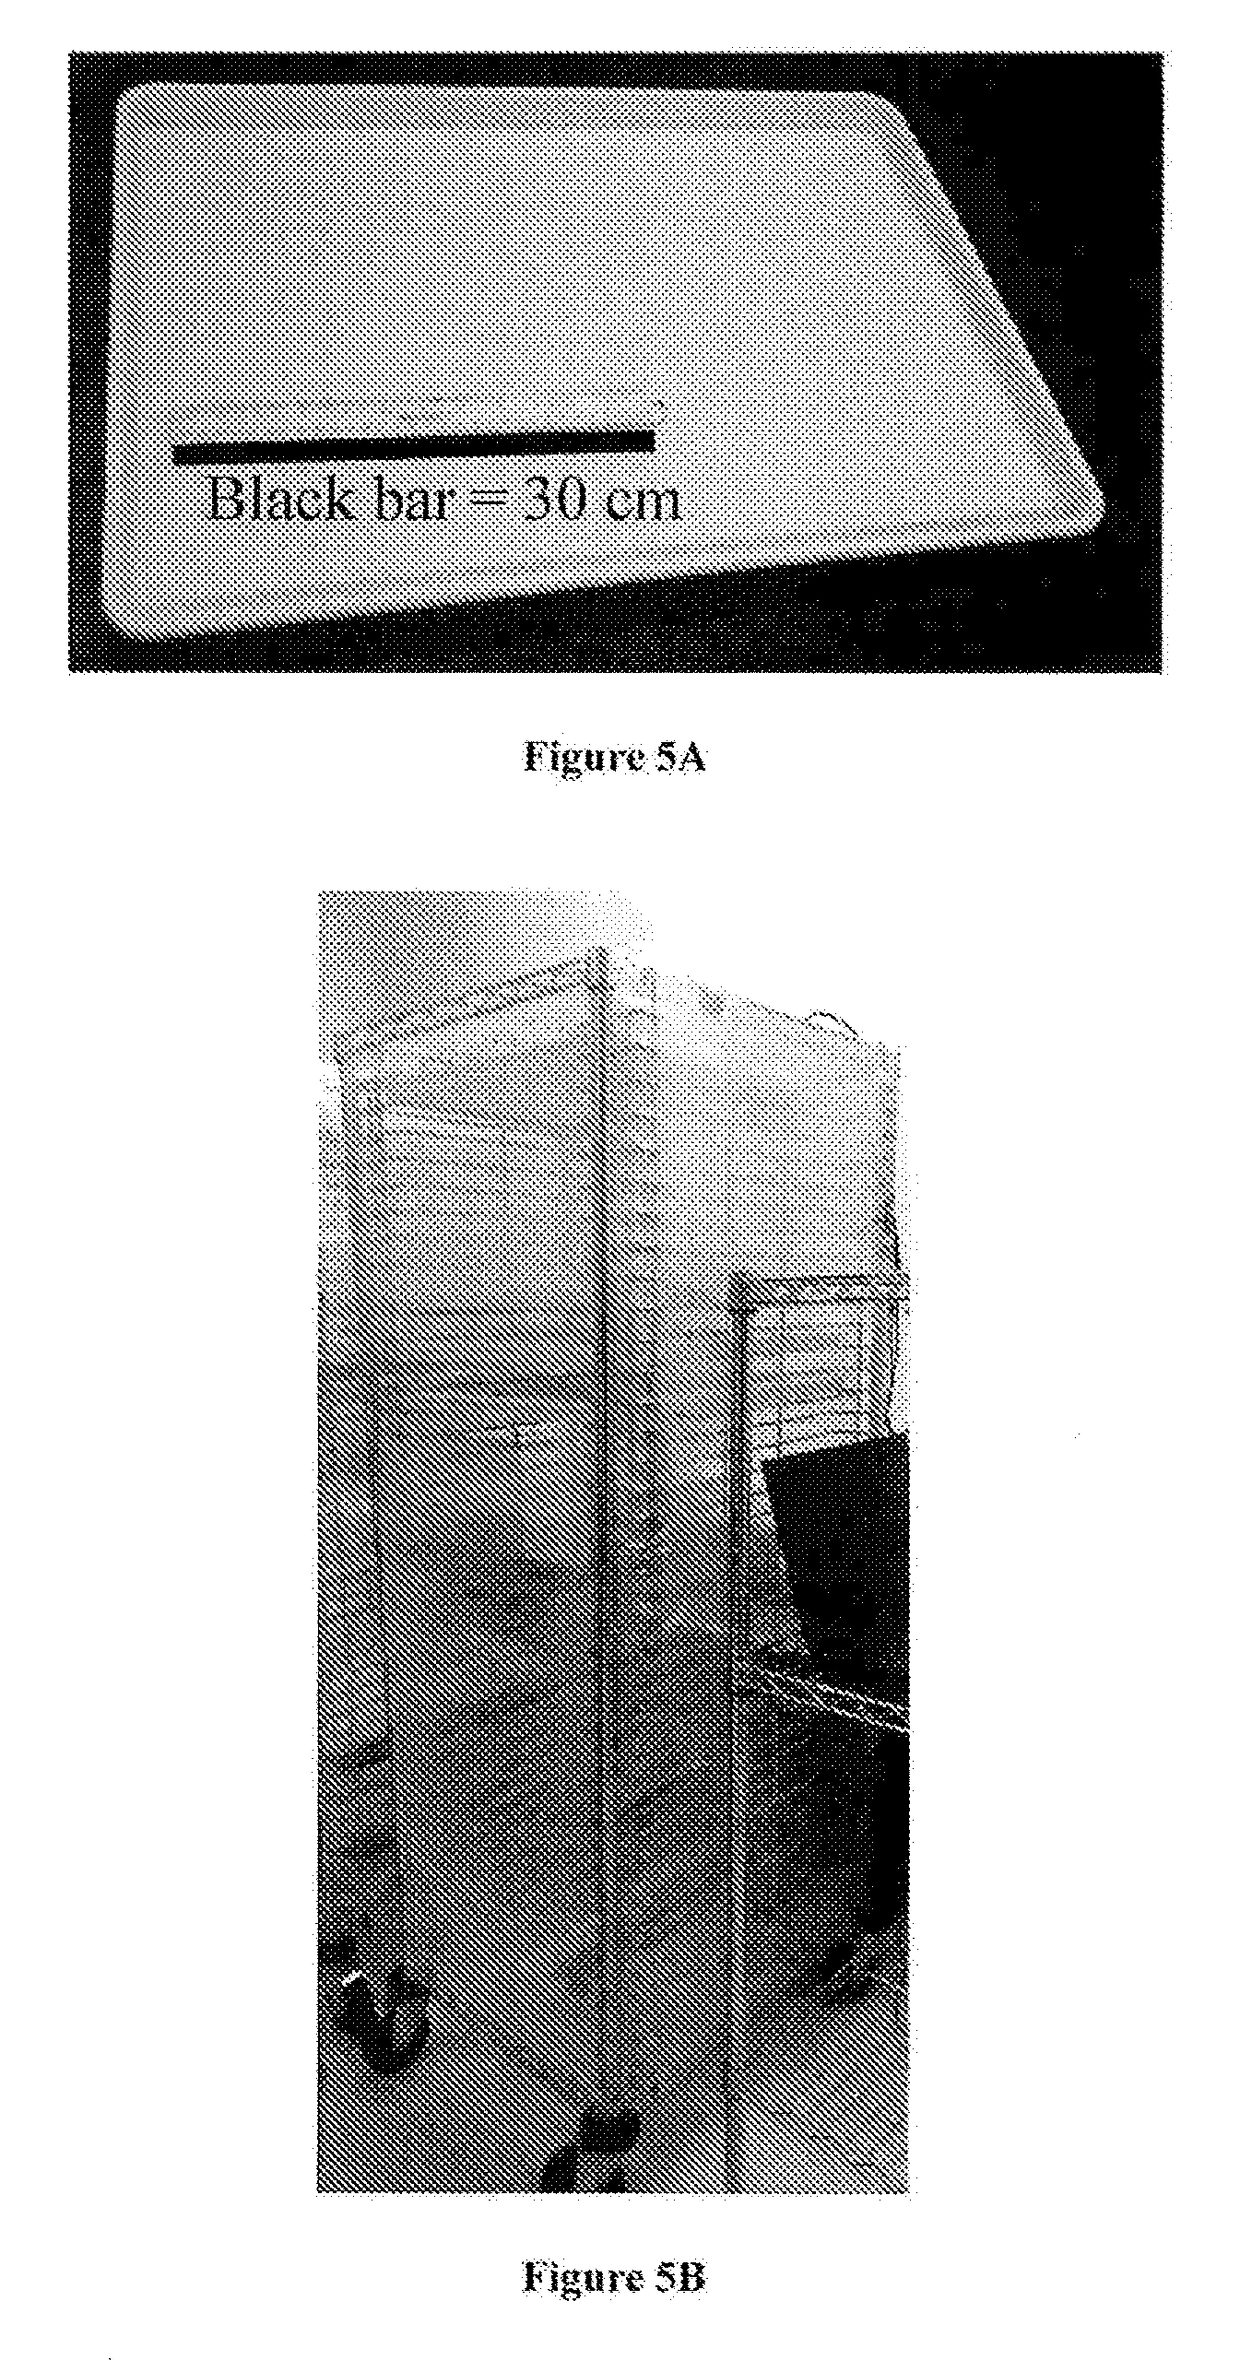 Filamentous fungal biomats, methods of their production and methods of their use